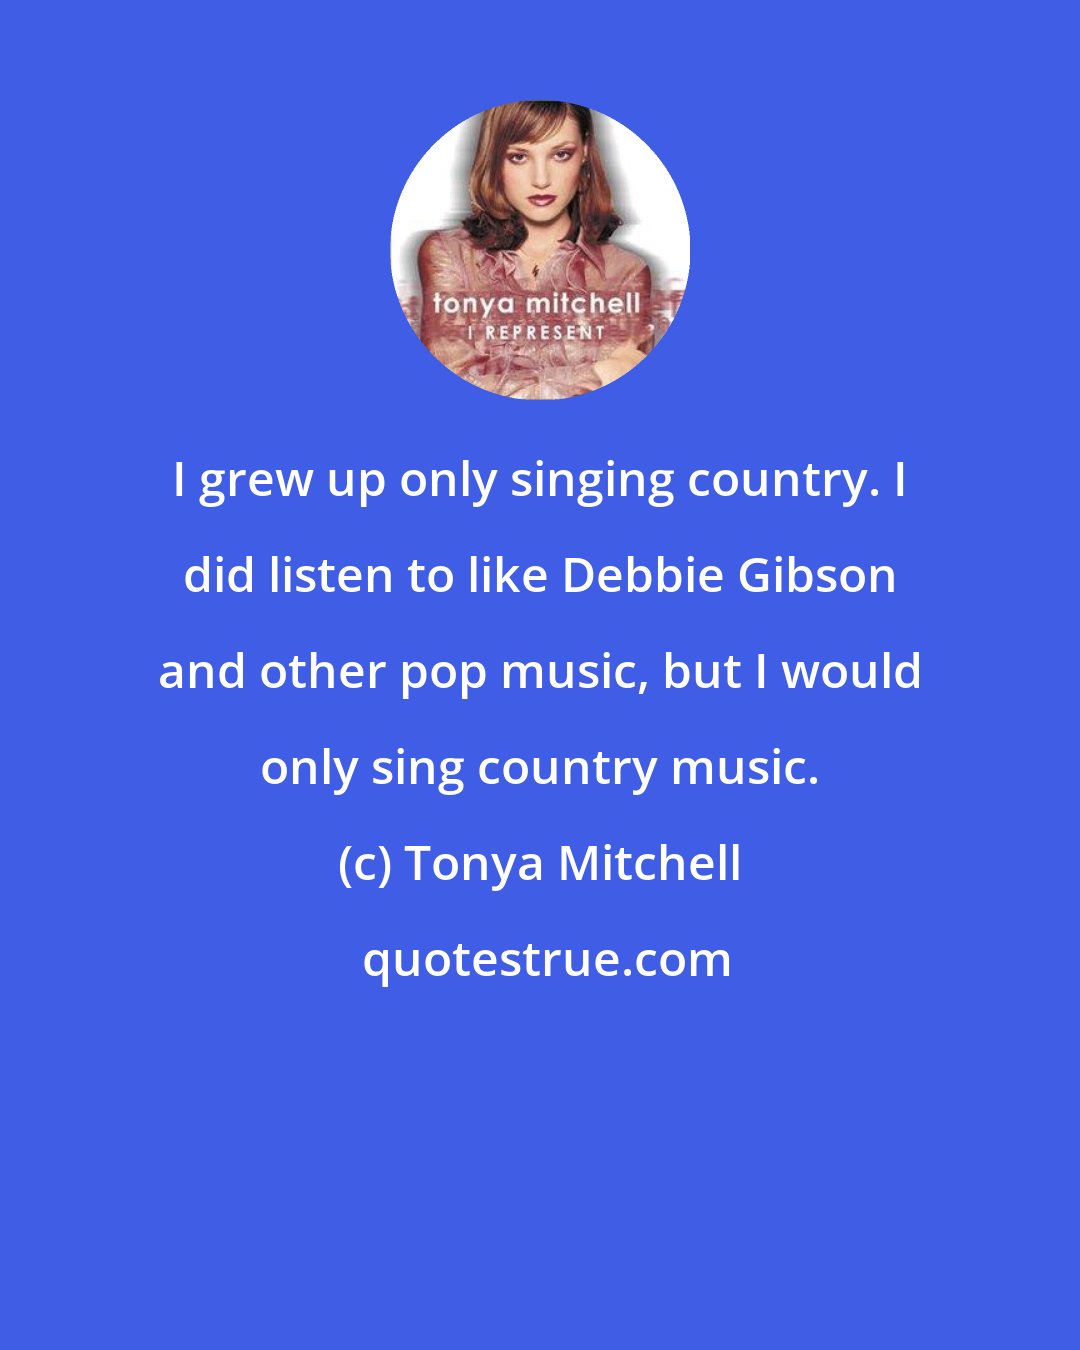 Tonya Mitchell: I grew up only singing country. I did listen to like Debbie Gibson and other pop music, but I would only sing country music.